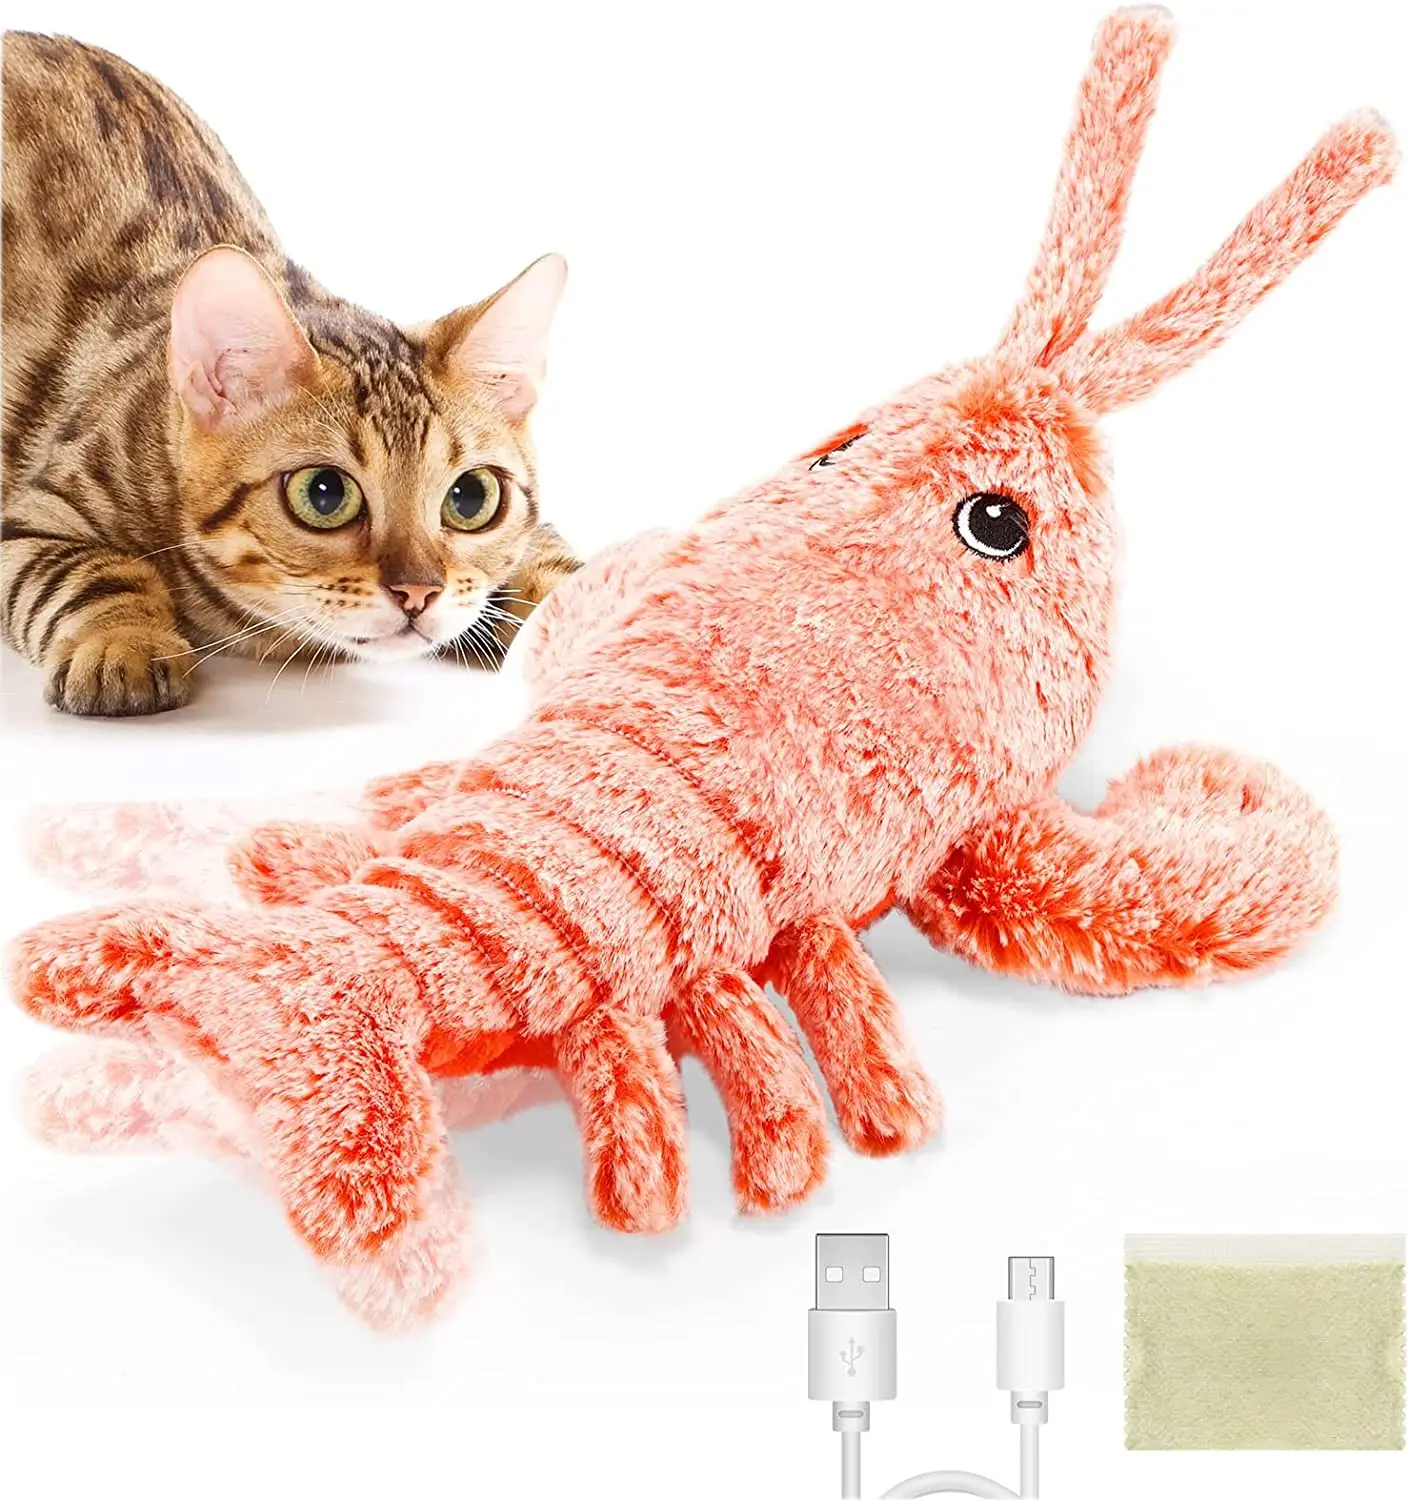 Electric Flopping Lobster Cat Toy Realistic Jumping Shrimp Plush Interactive Washable Toys With Catnip Packets For Cat Small Dog